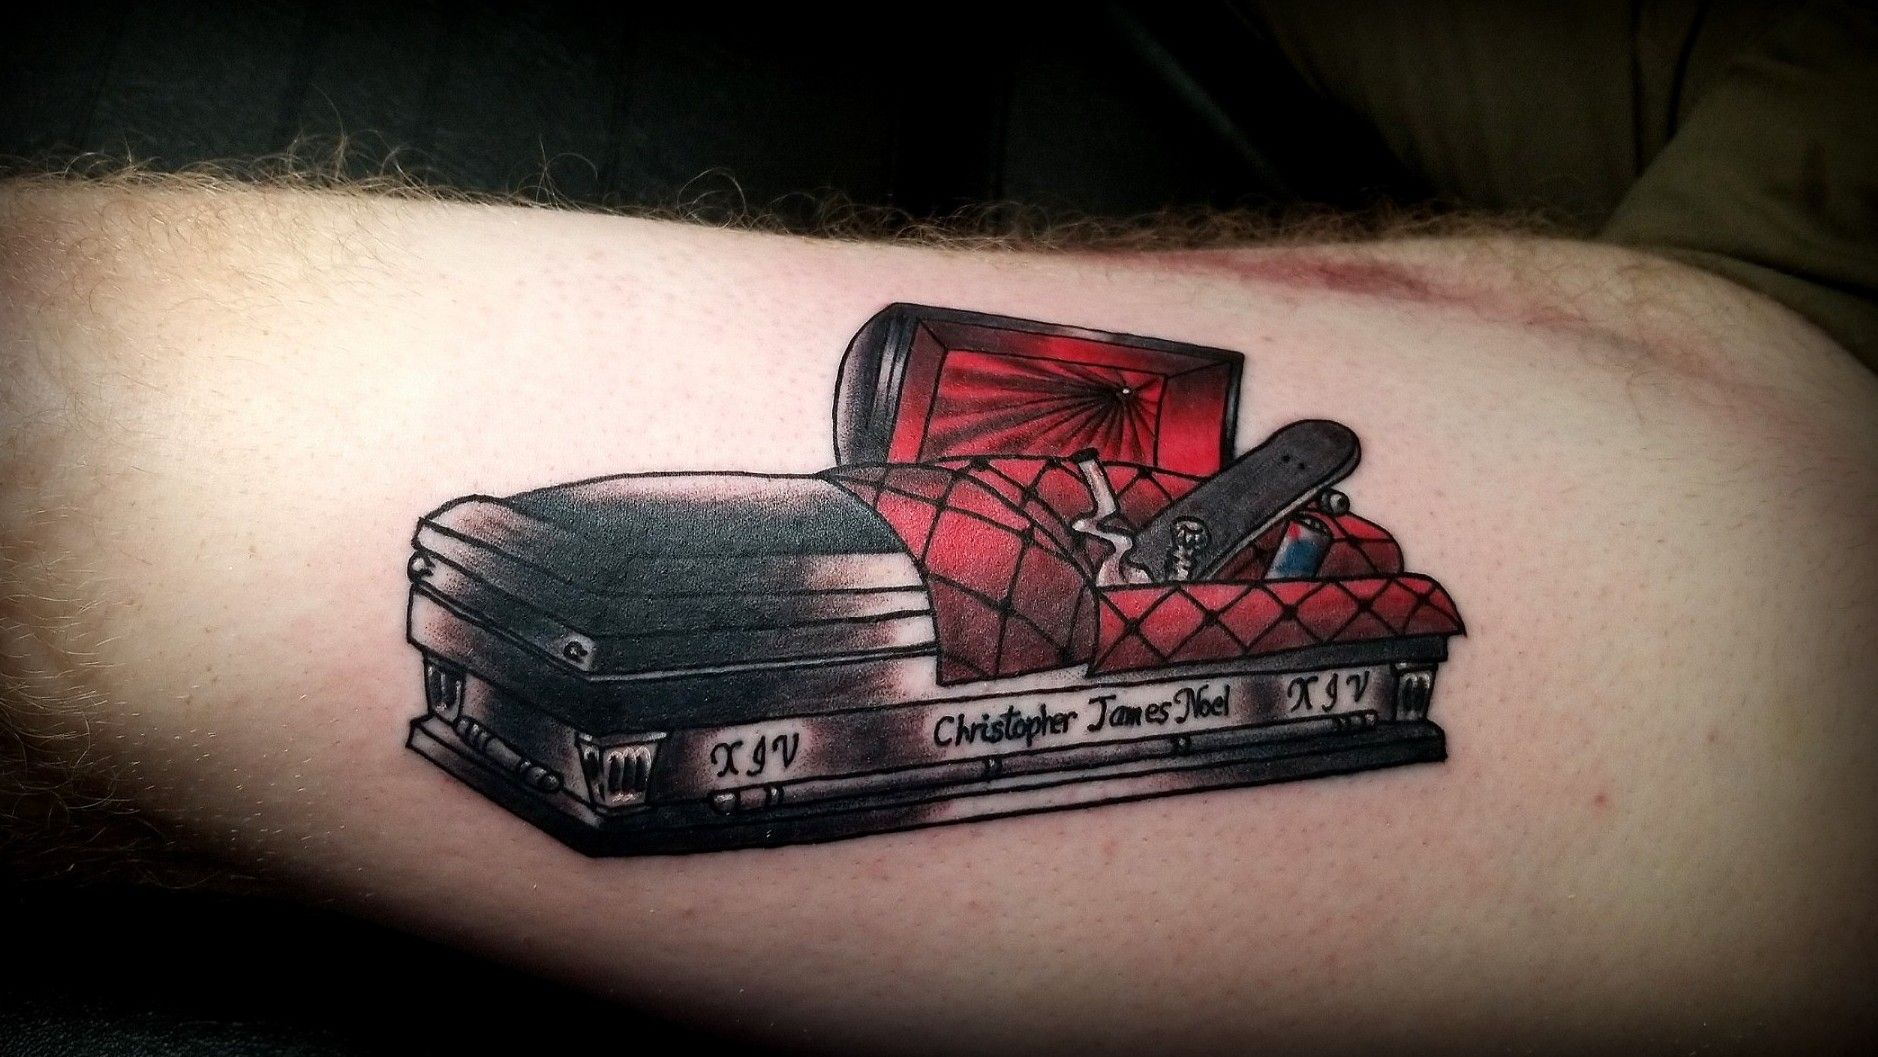 American Tattoo Society of Jacksonville  Check out this tow truck action  tattoo by Billy Smith done a while back To see more work by Billy check  out his Instagram billysmithtattoos and